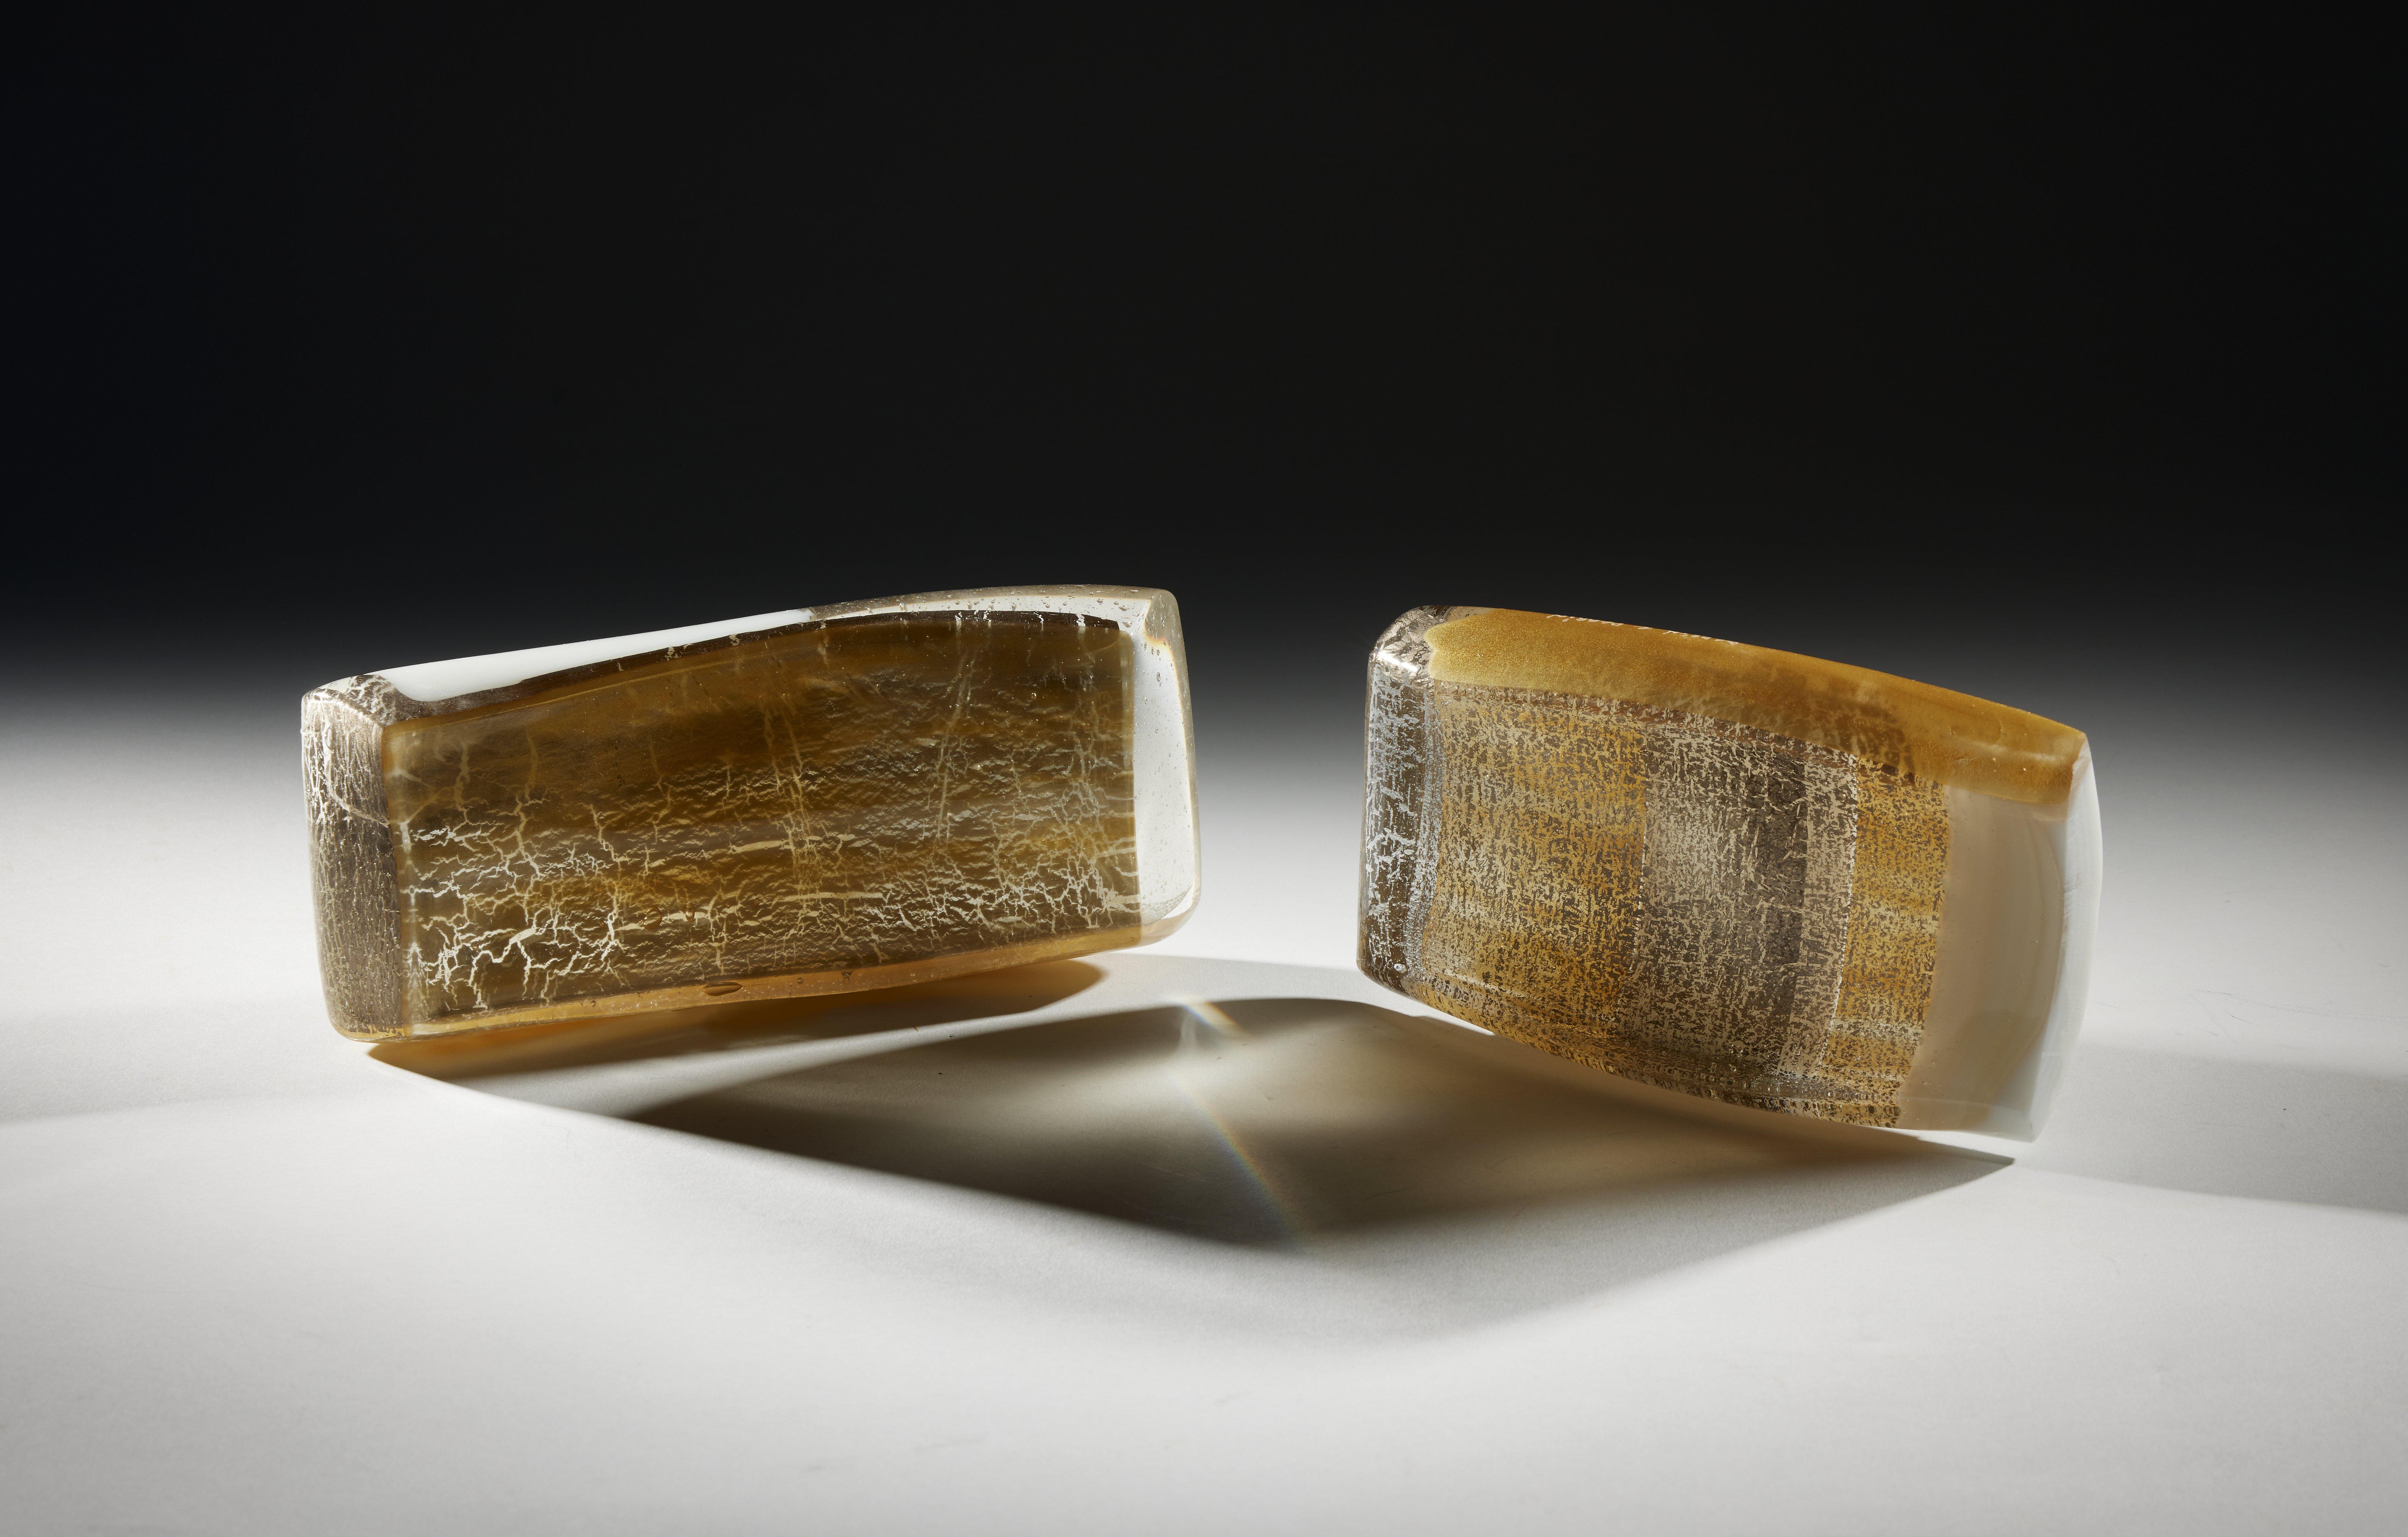 Glass Sculptural Installation Splash Two Made in France One of a Kind - Beige Abstract Sculpture by Perrin & Perrin